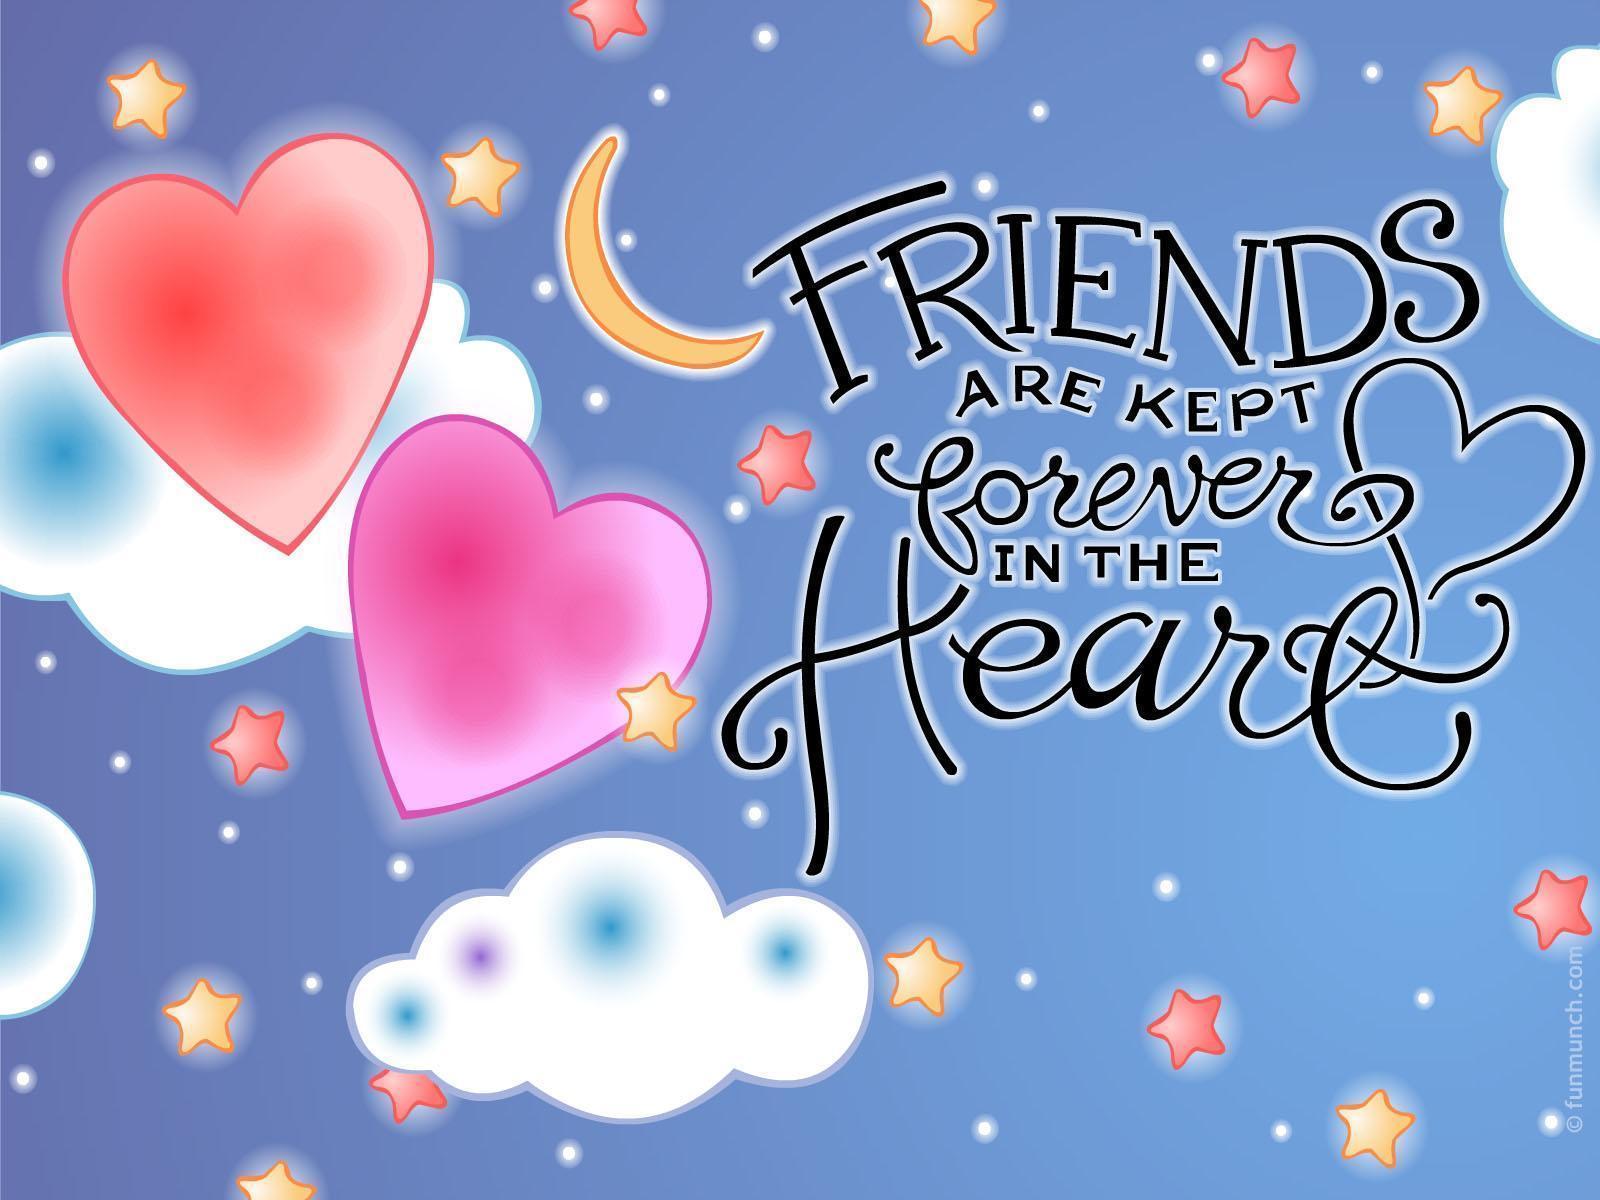 Best Friends Forever Wallpapers Wallpaper Cave